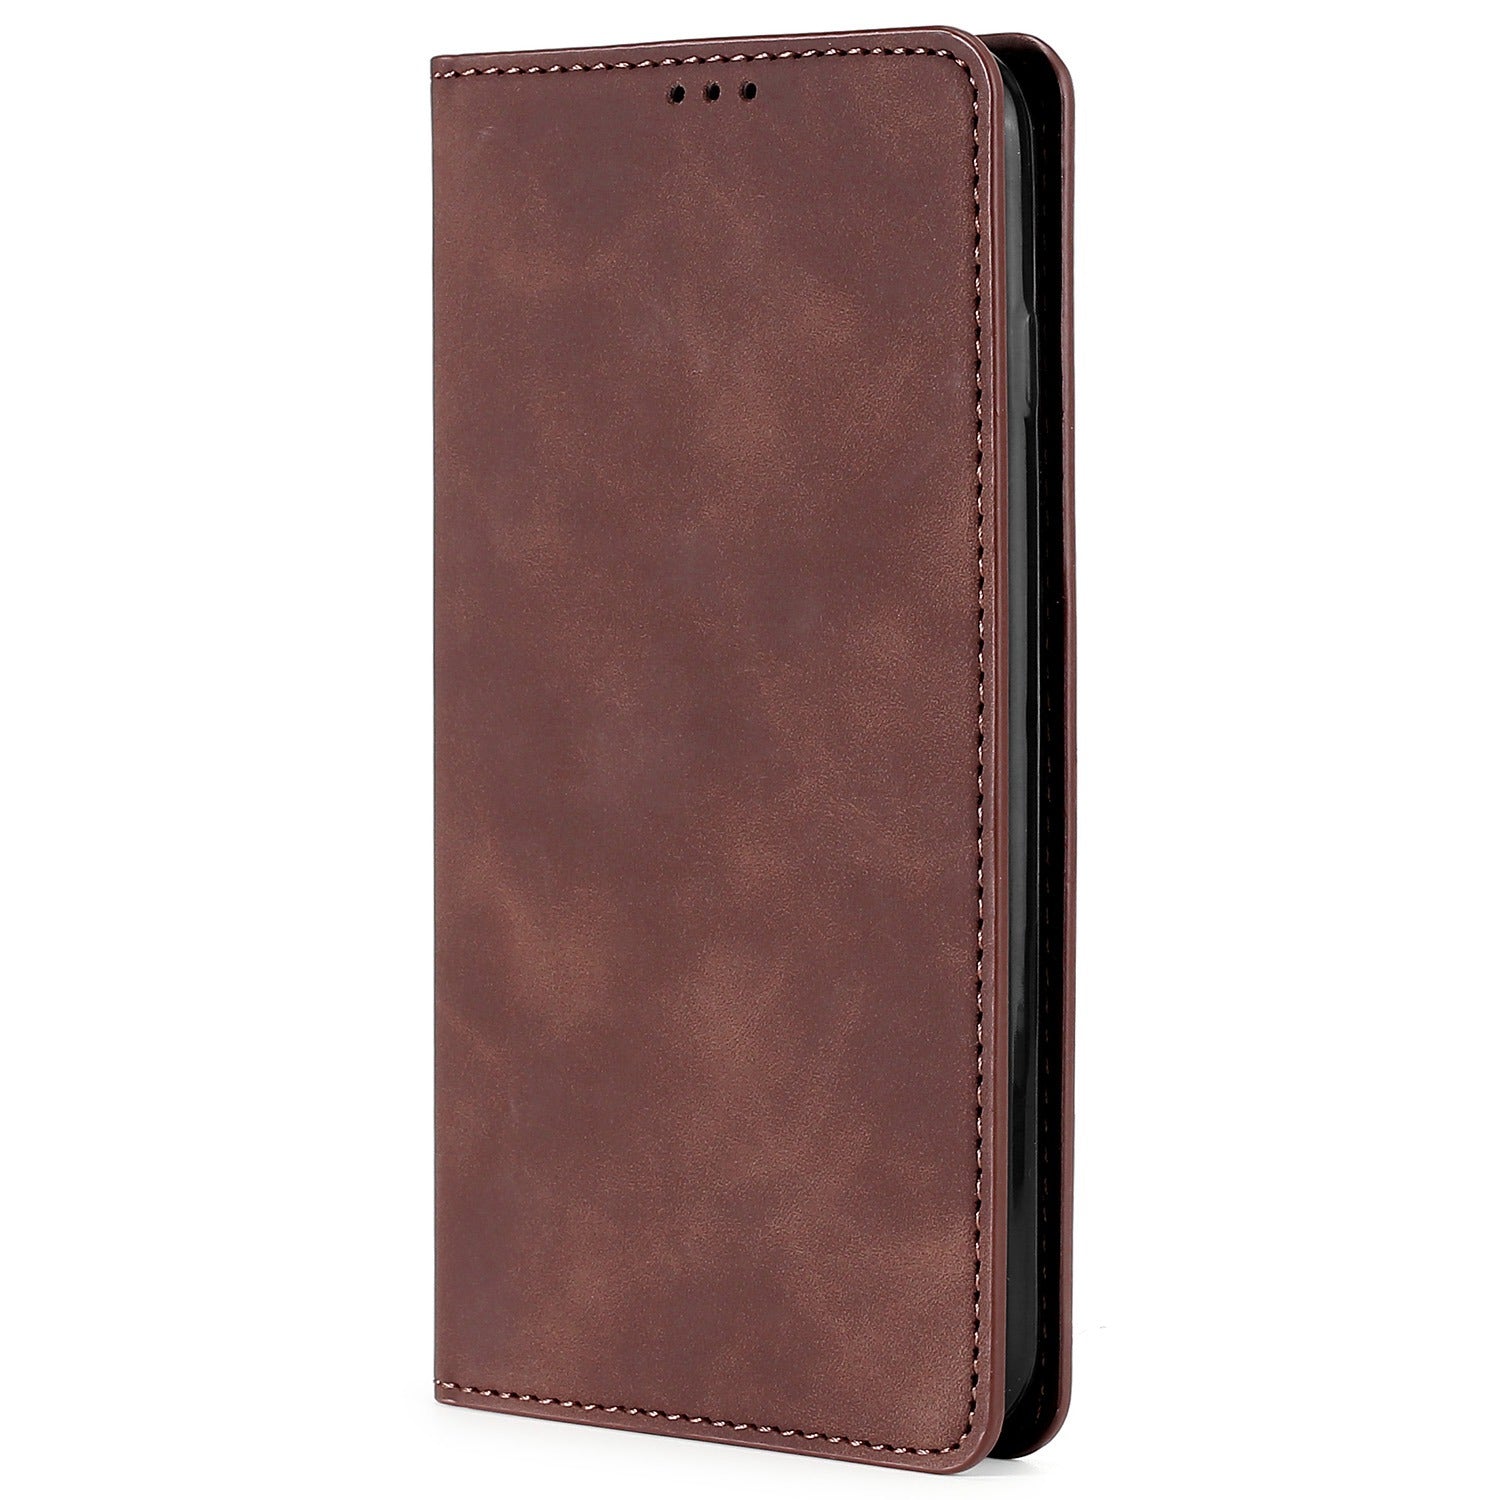 For vivo X100 5G Case with 2 Card Holder Slot Leather Magnetic Closure Cover - Dark Brown